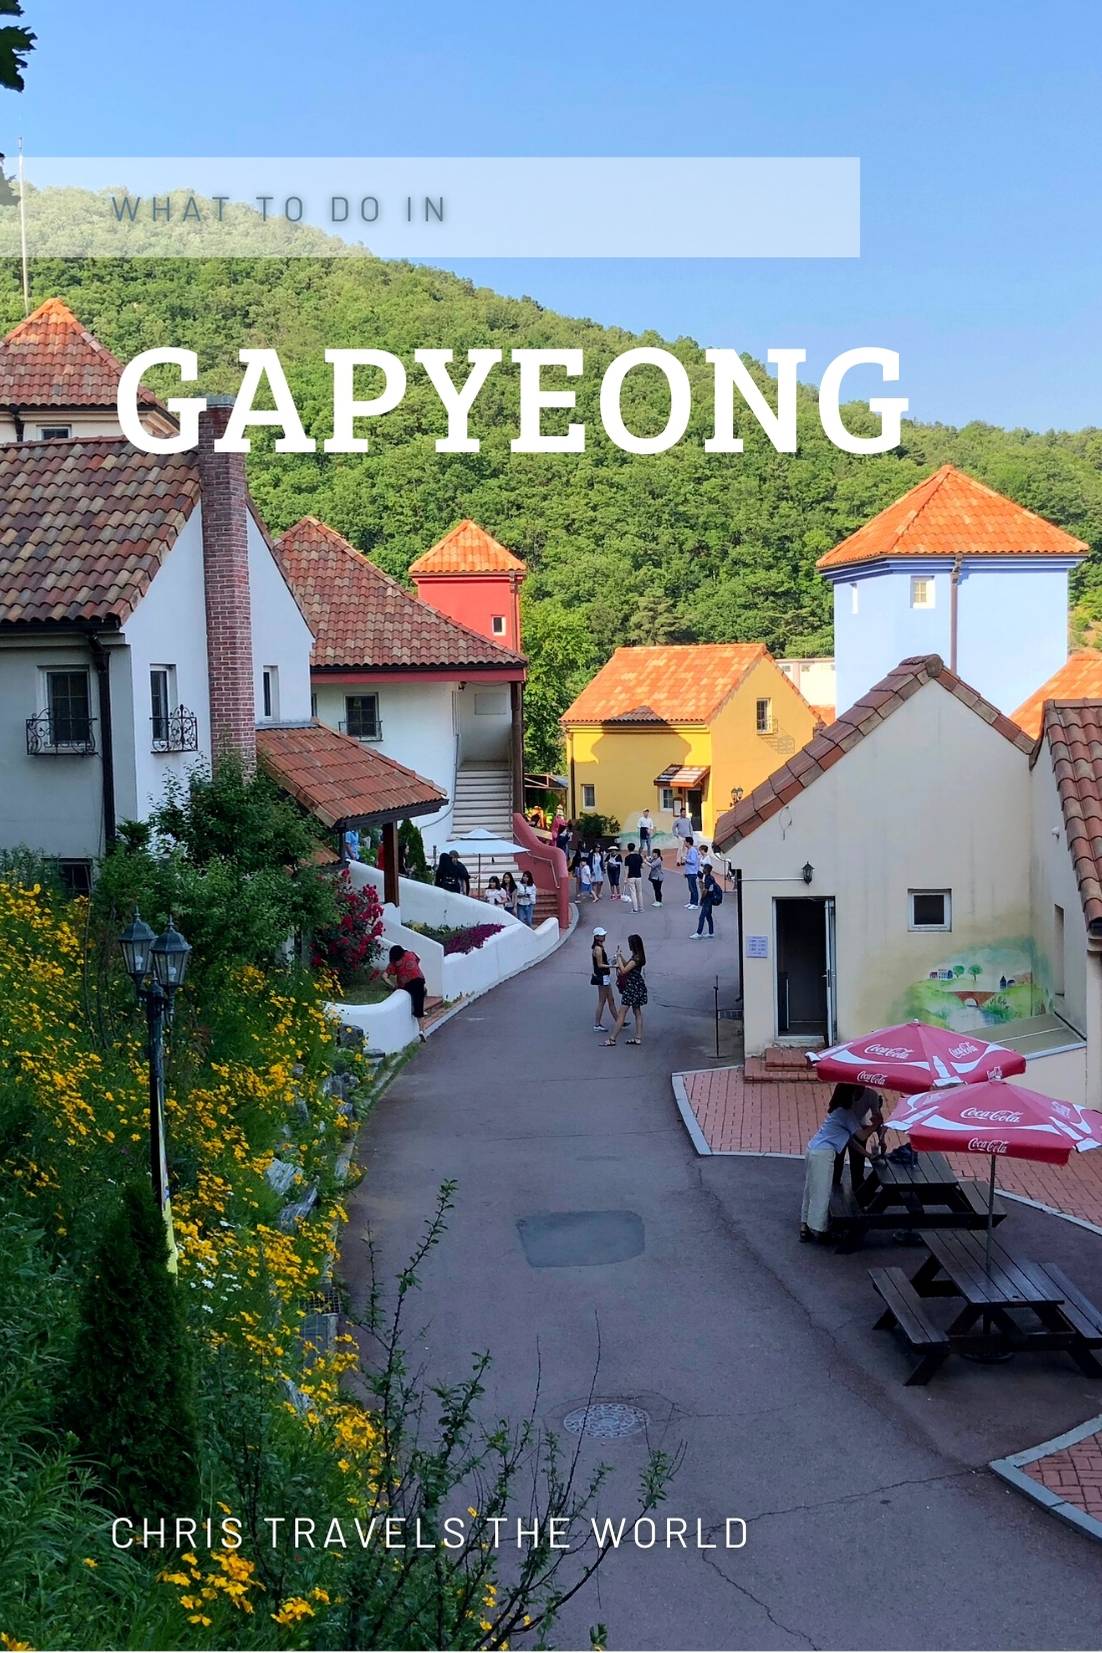 Gapyeong - What to do